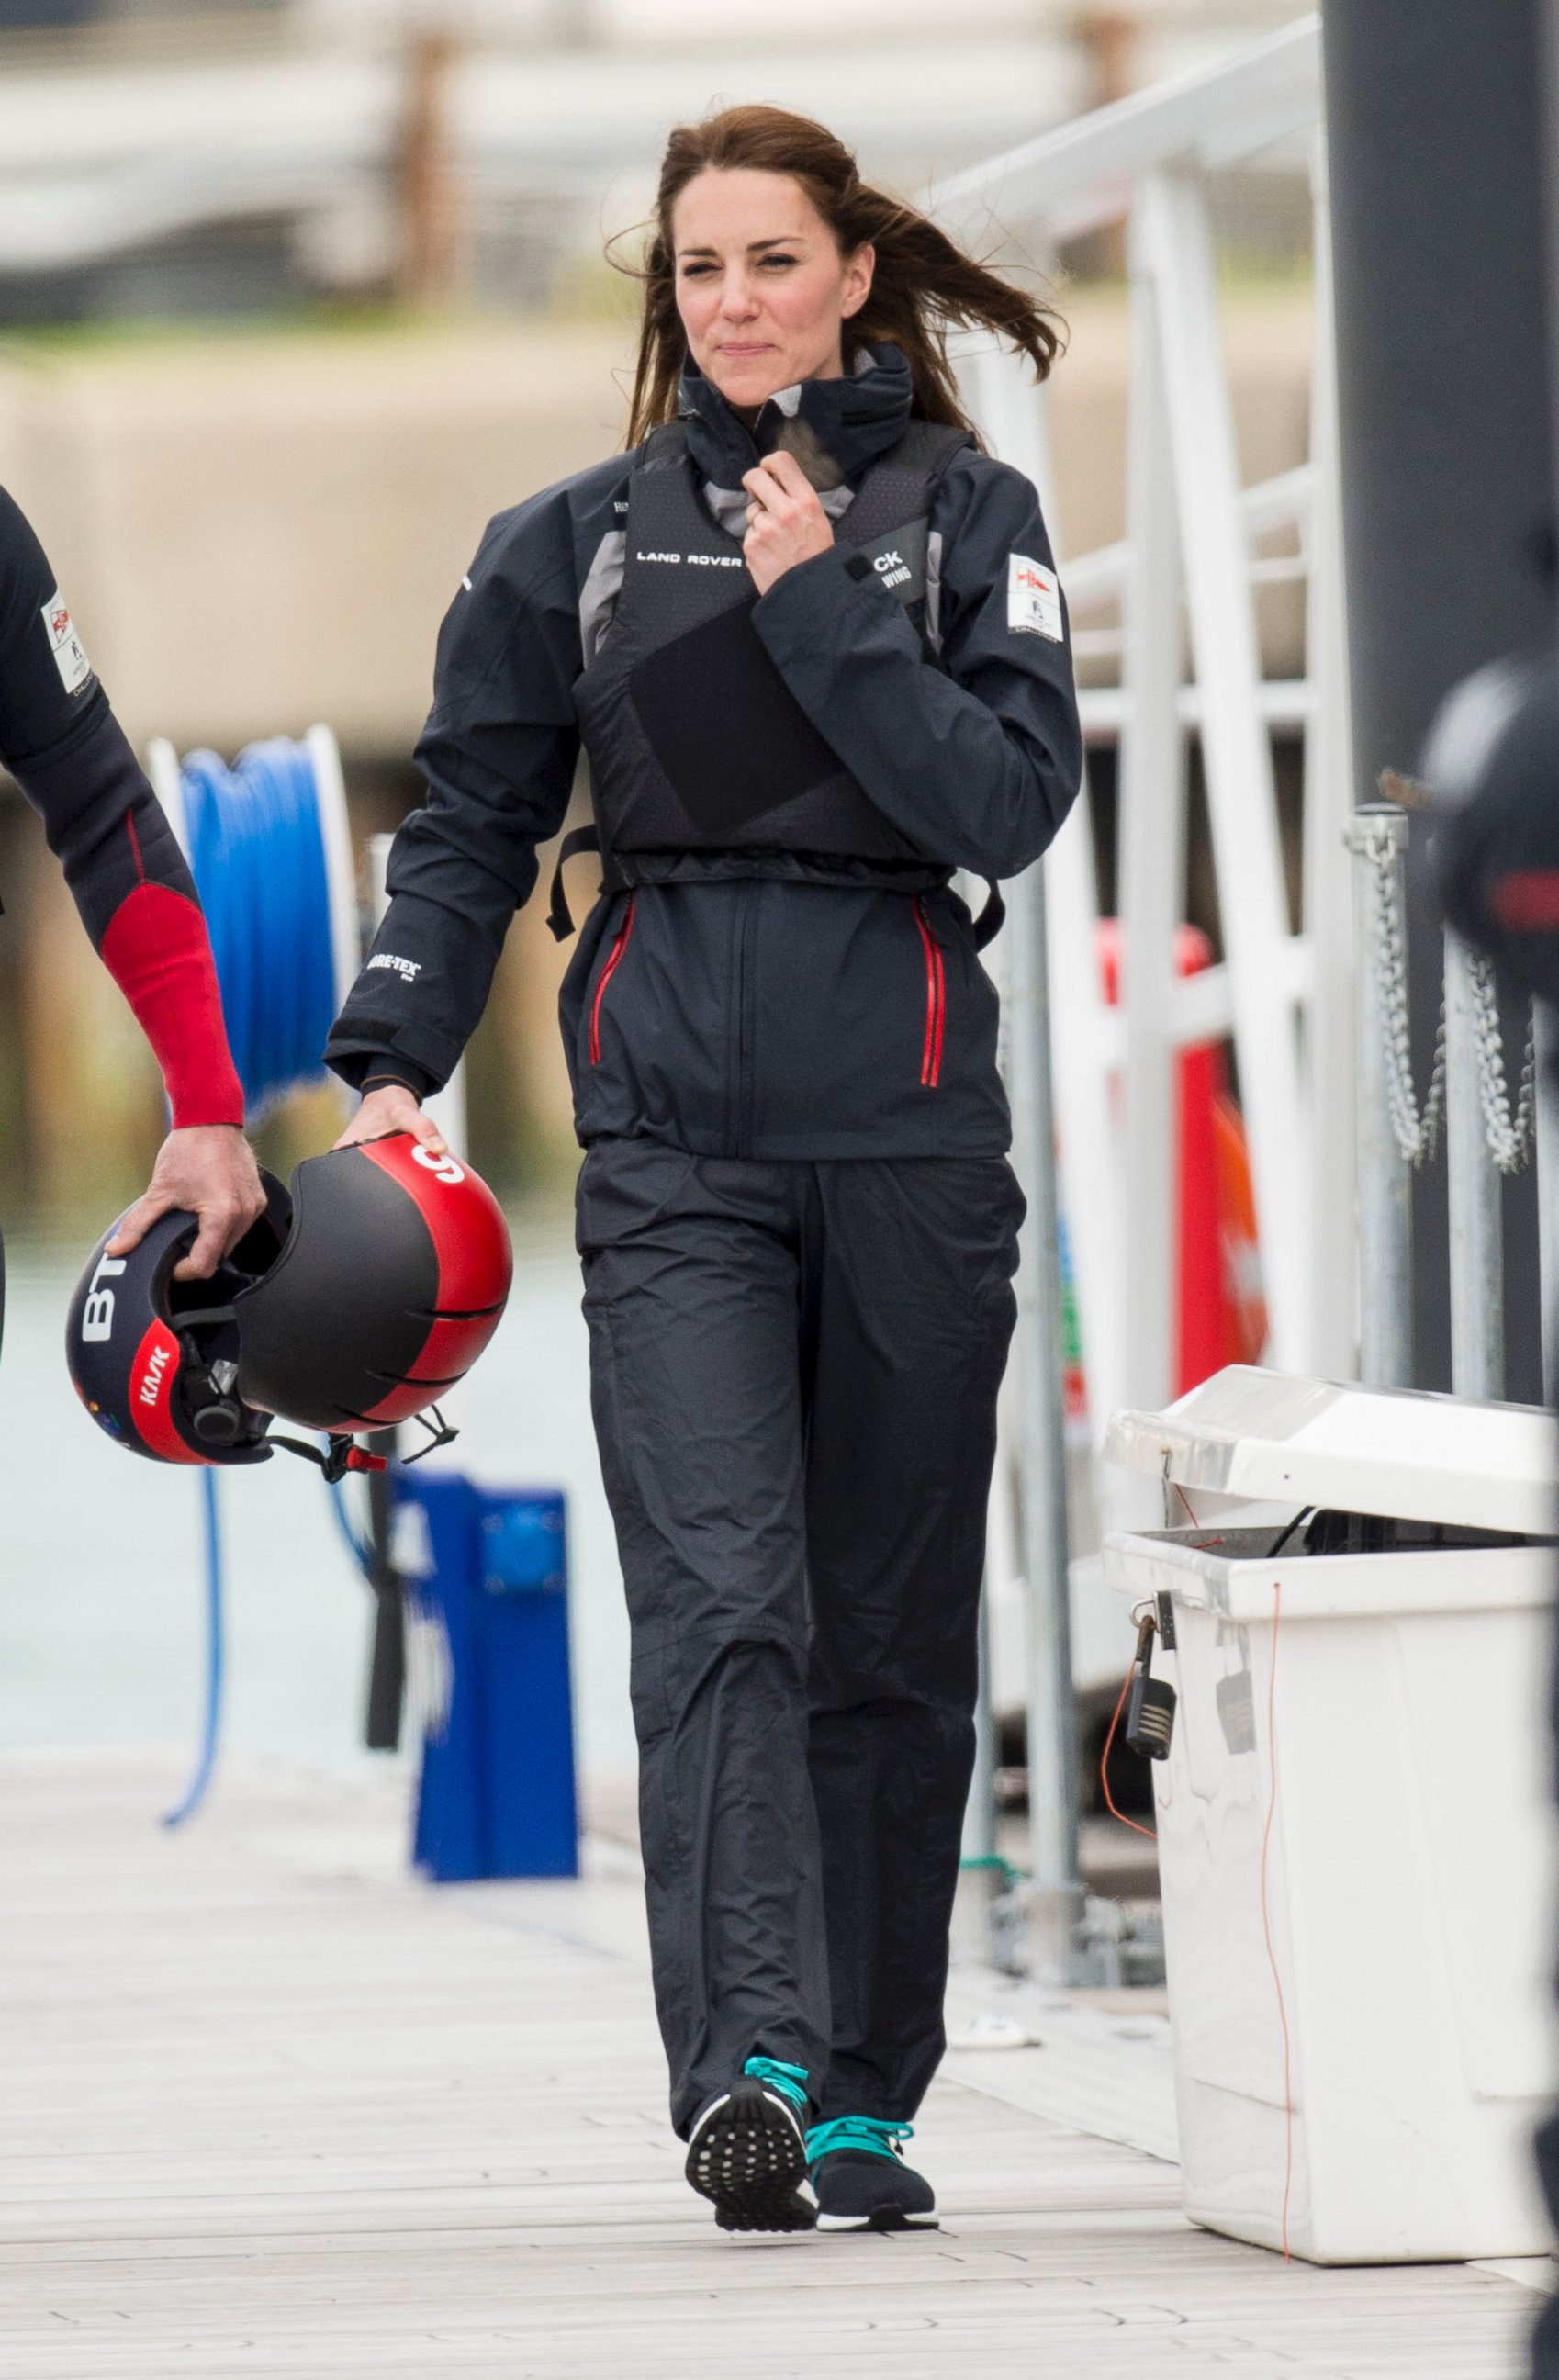 PHOTO: Catherine, Duchess of Cambridge joins the Land Rover BAR team on board their training boat, as they run a training circuit on the Solent, May 20, 2016, in Portsmouth, England.